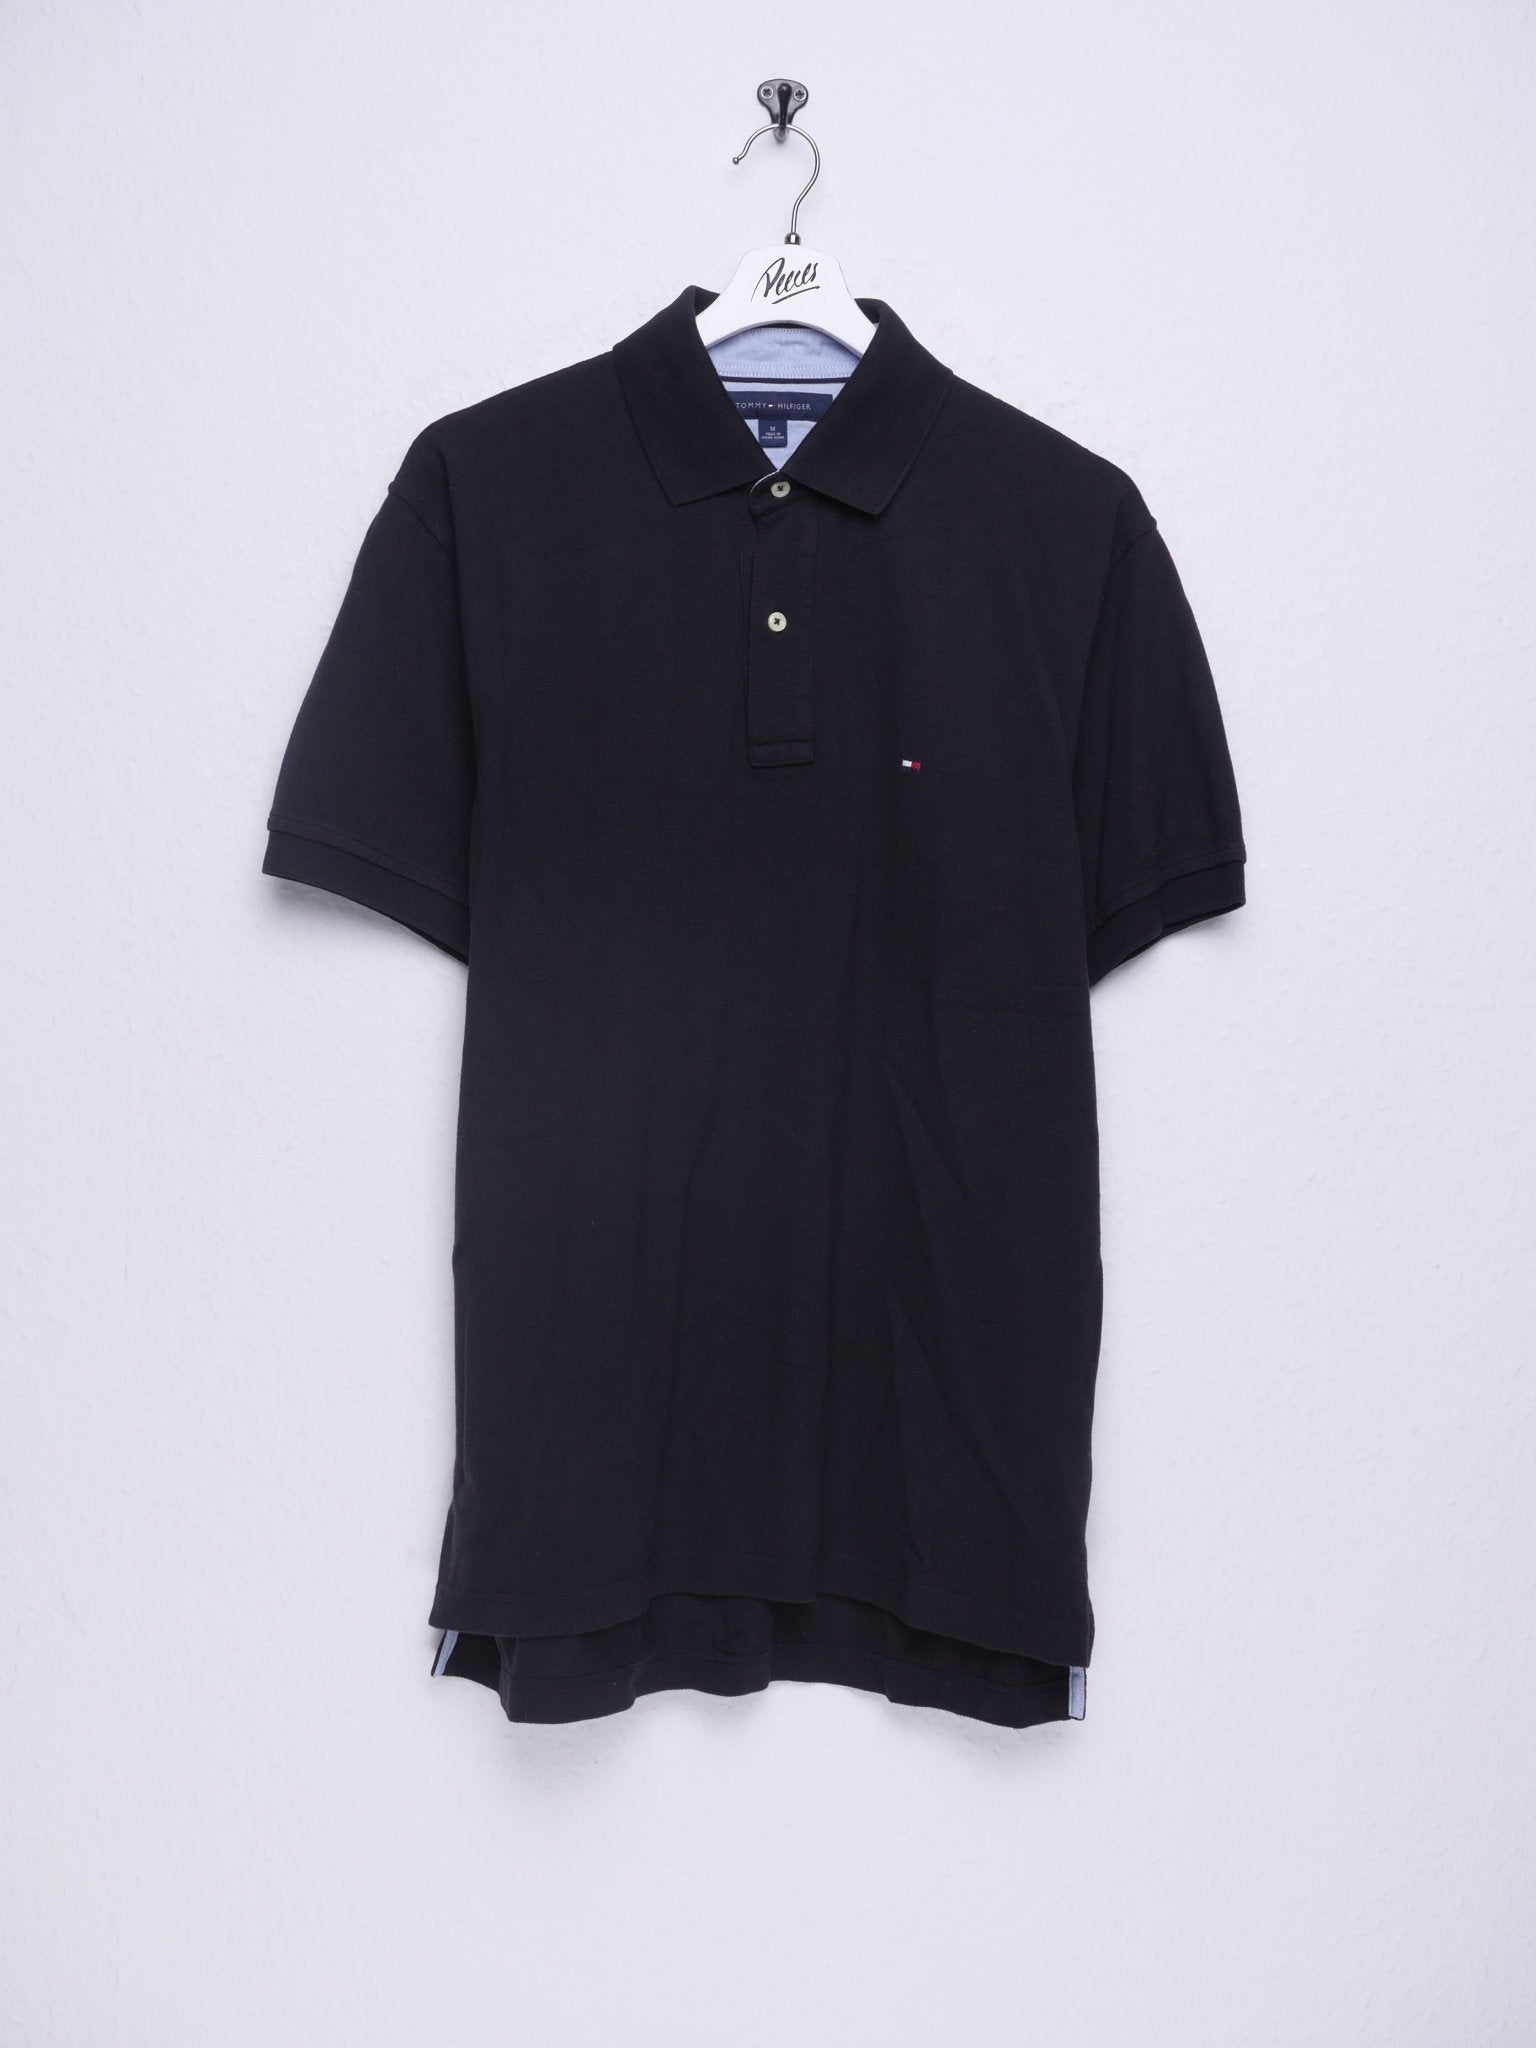 Tommy Hilfiger embroidered Logo black S/S Polo Shirt - Peeces